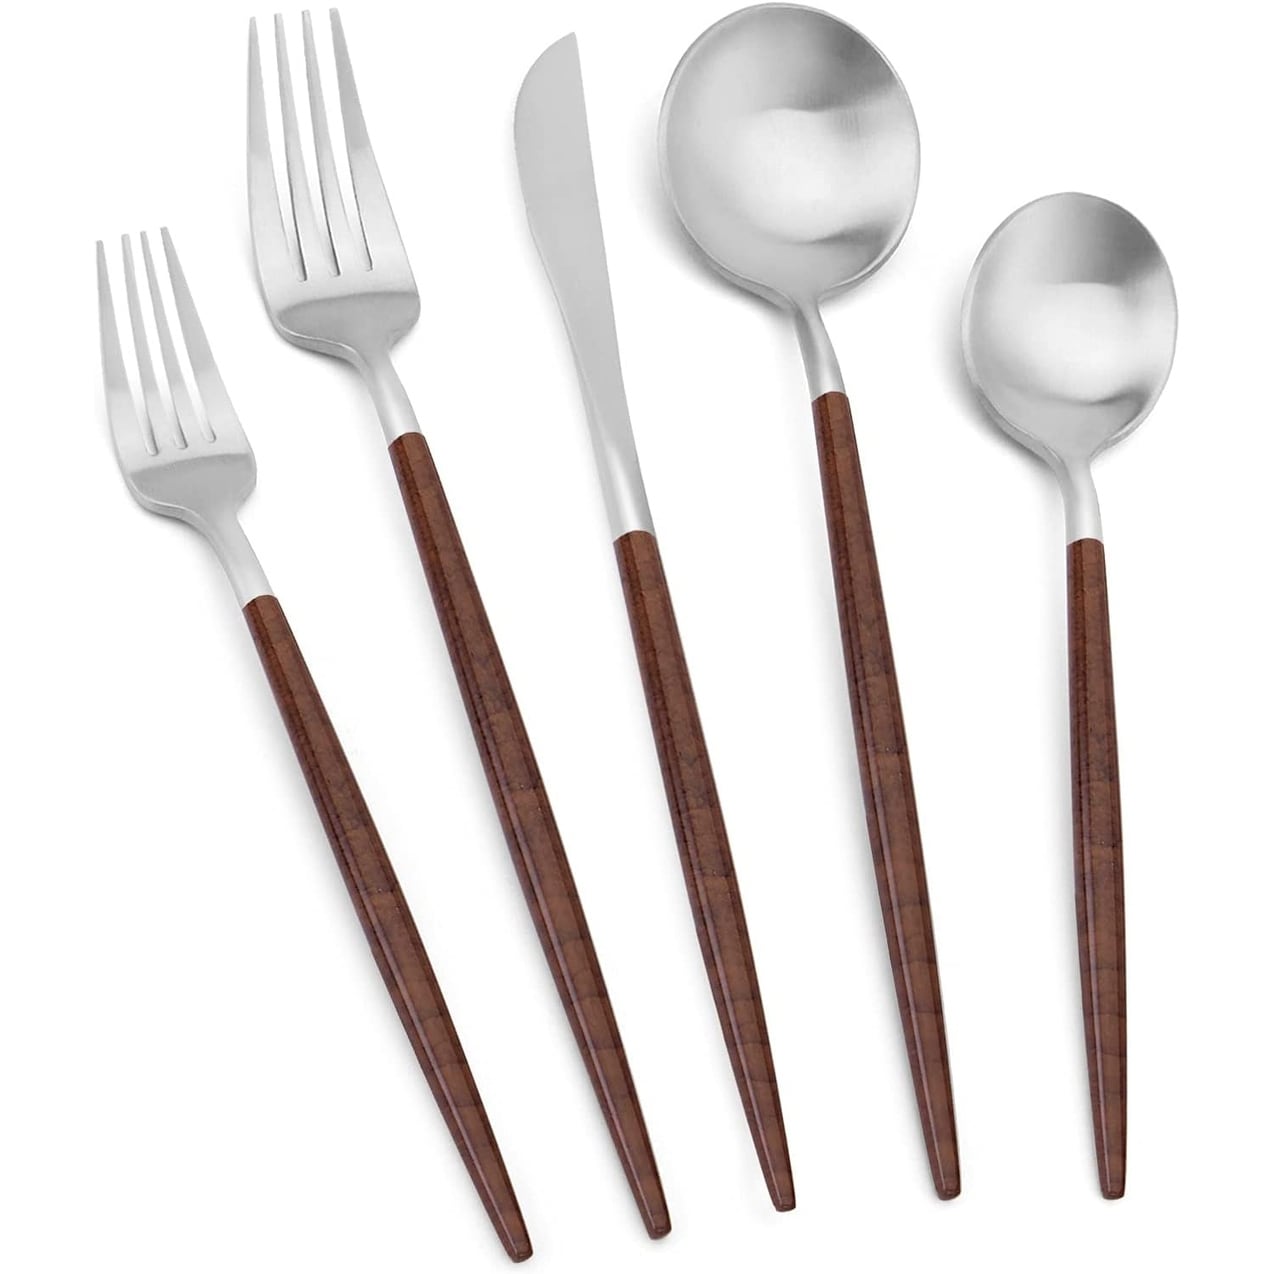 https://ak1.ostkcdn.com/images/products/is/images/direct/9b626be0d580d99191f3ee58643ea6e5c628c502/Silverware-Set-with-black-handle%2C-Vanys-30-Piece-Stainless-Steel-Cutlery-Flatware-Set%2C-Kitchen-Utensil-Sets-for-6.jpg